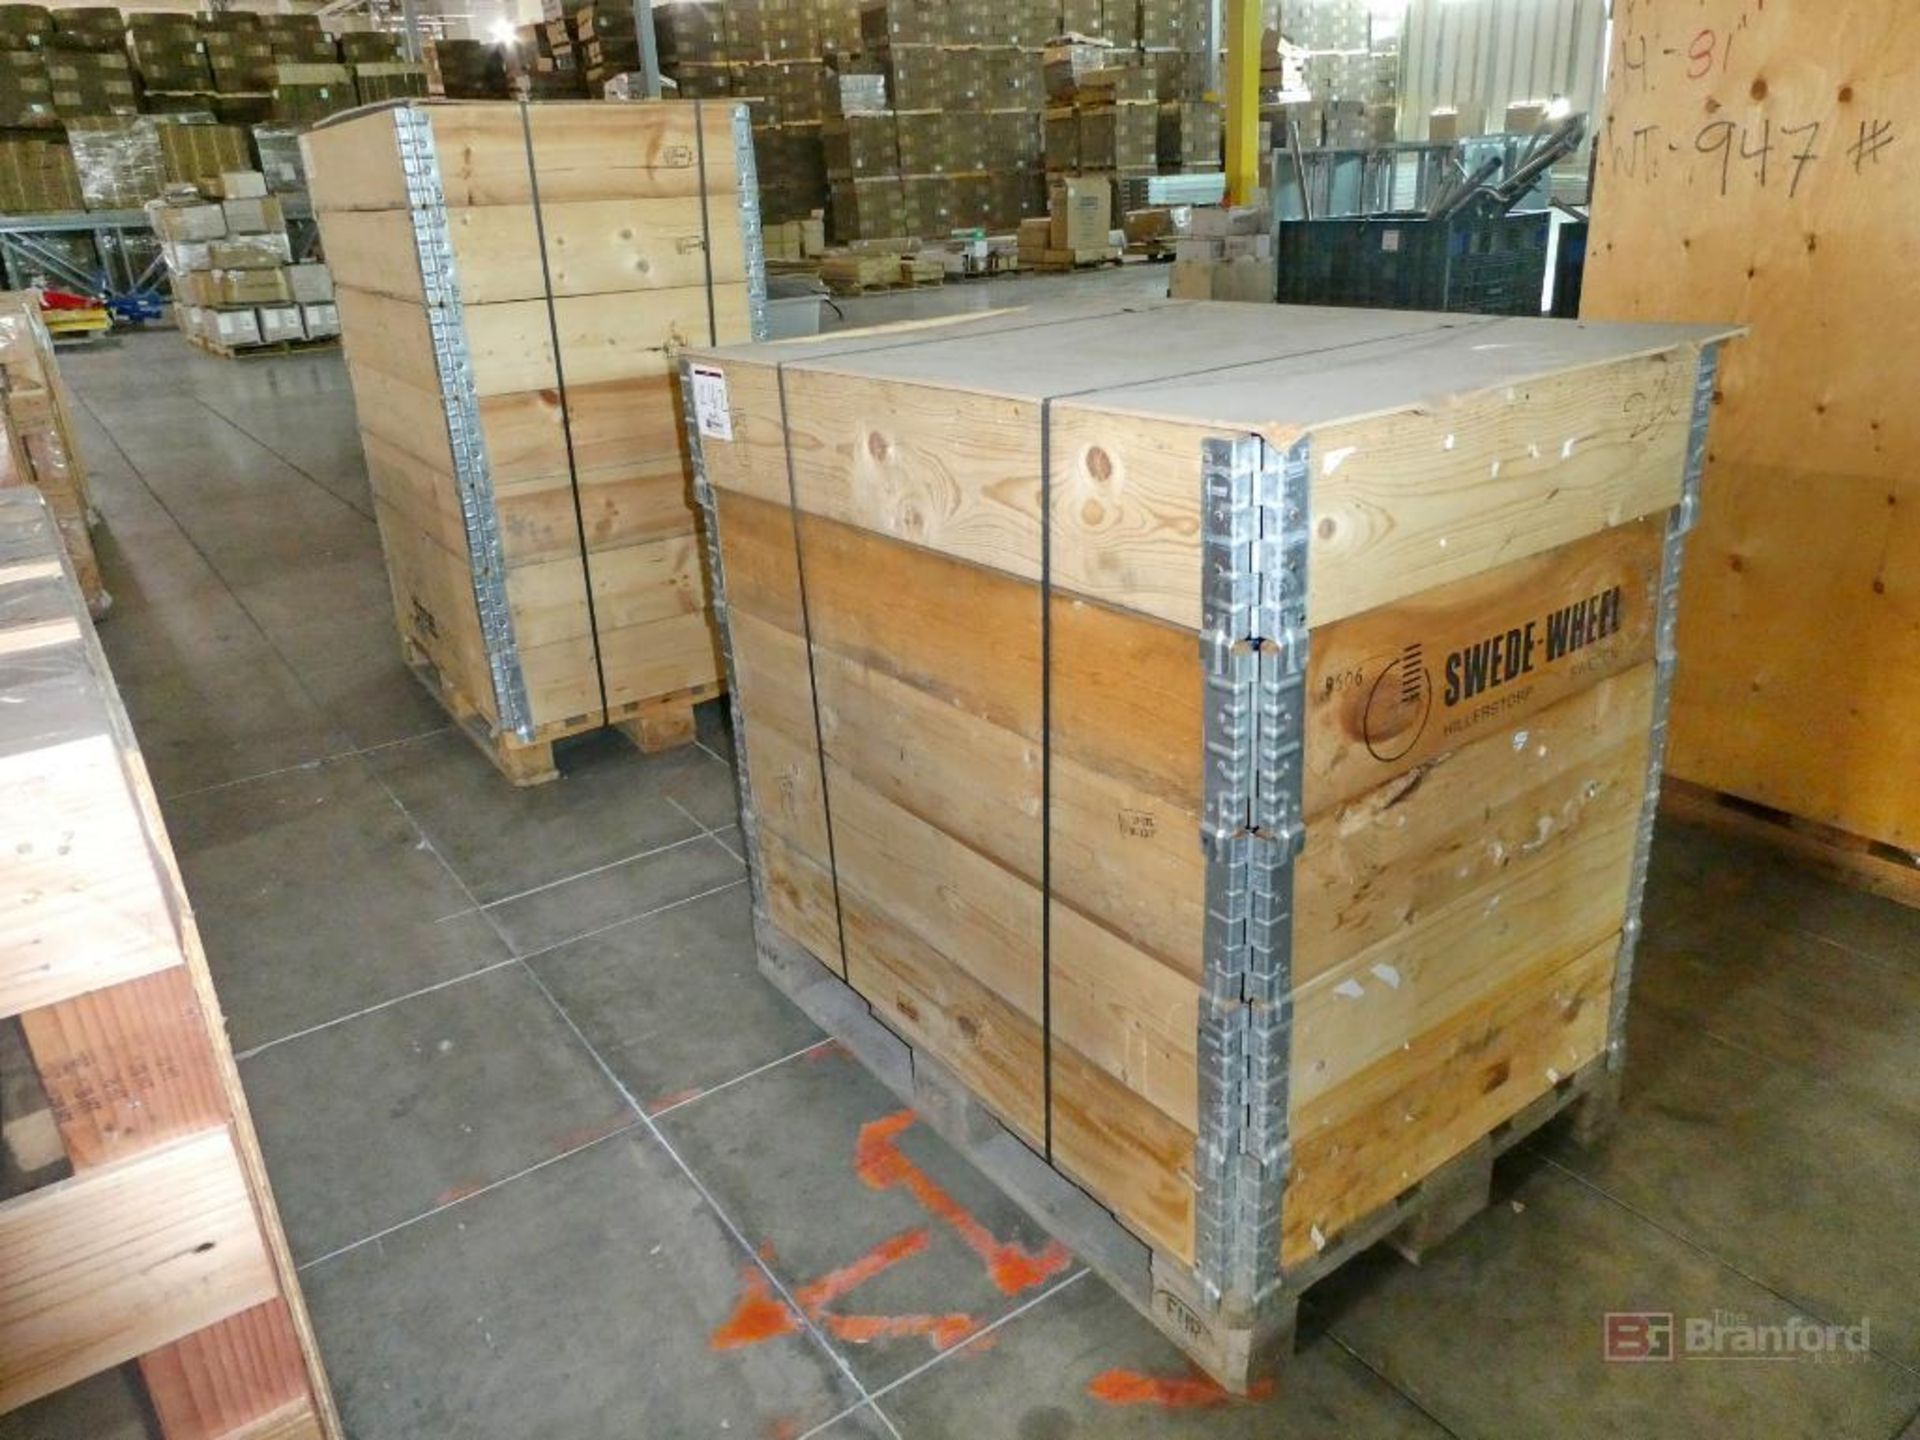 Tanis Non-Starch 1000kg/hr Gummy & Jelly Line (New in Crates/Never Installed) - Image 4 of 17